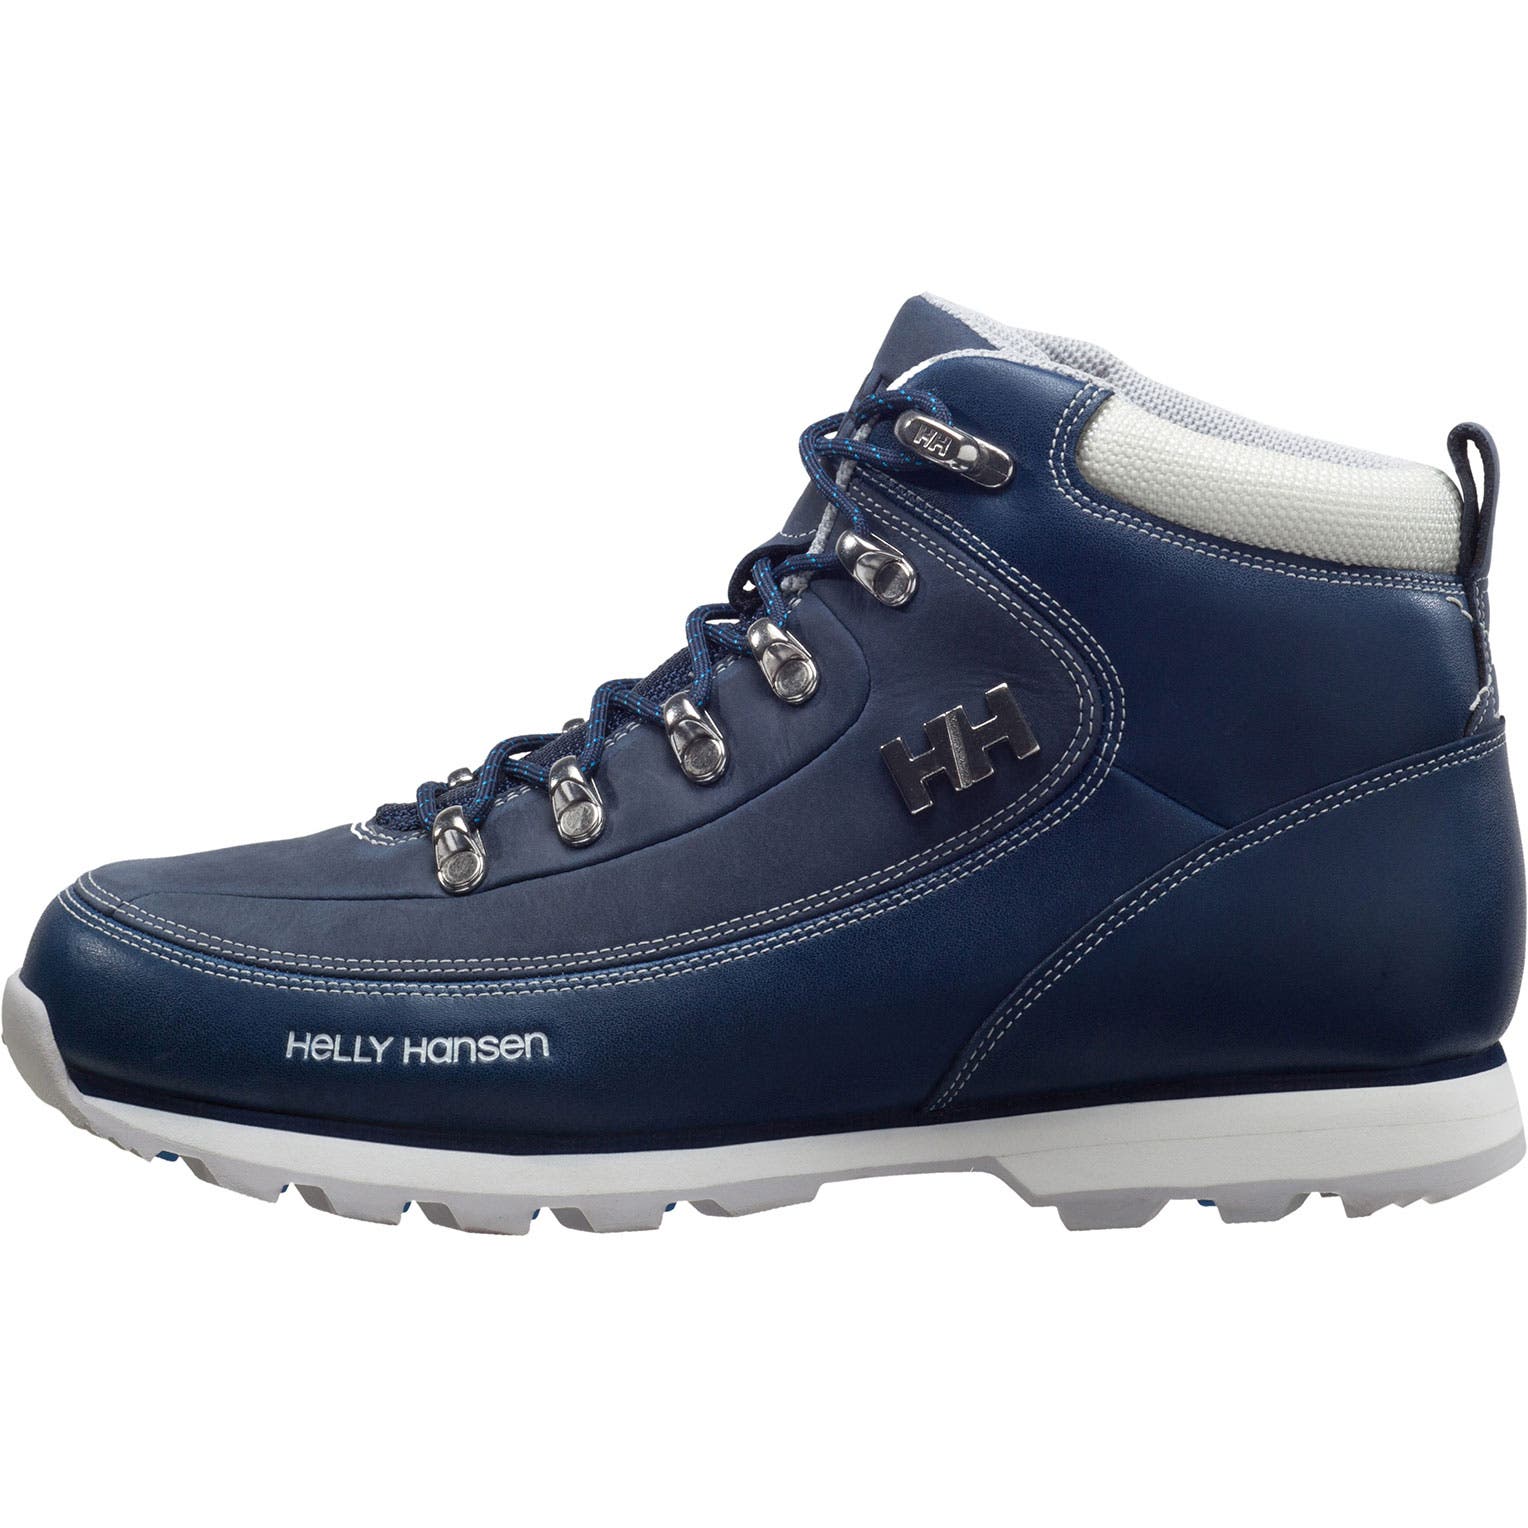 Women's Helly Hansen The Forester Winter Boot | Outdoor, Trail, Snow ...